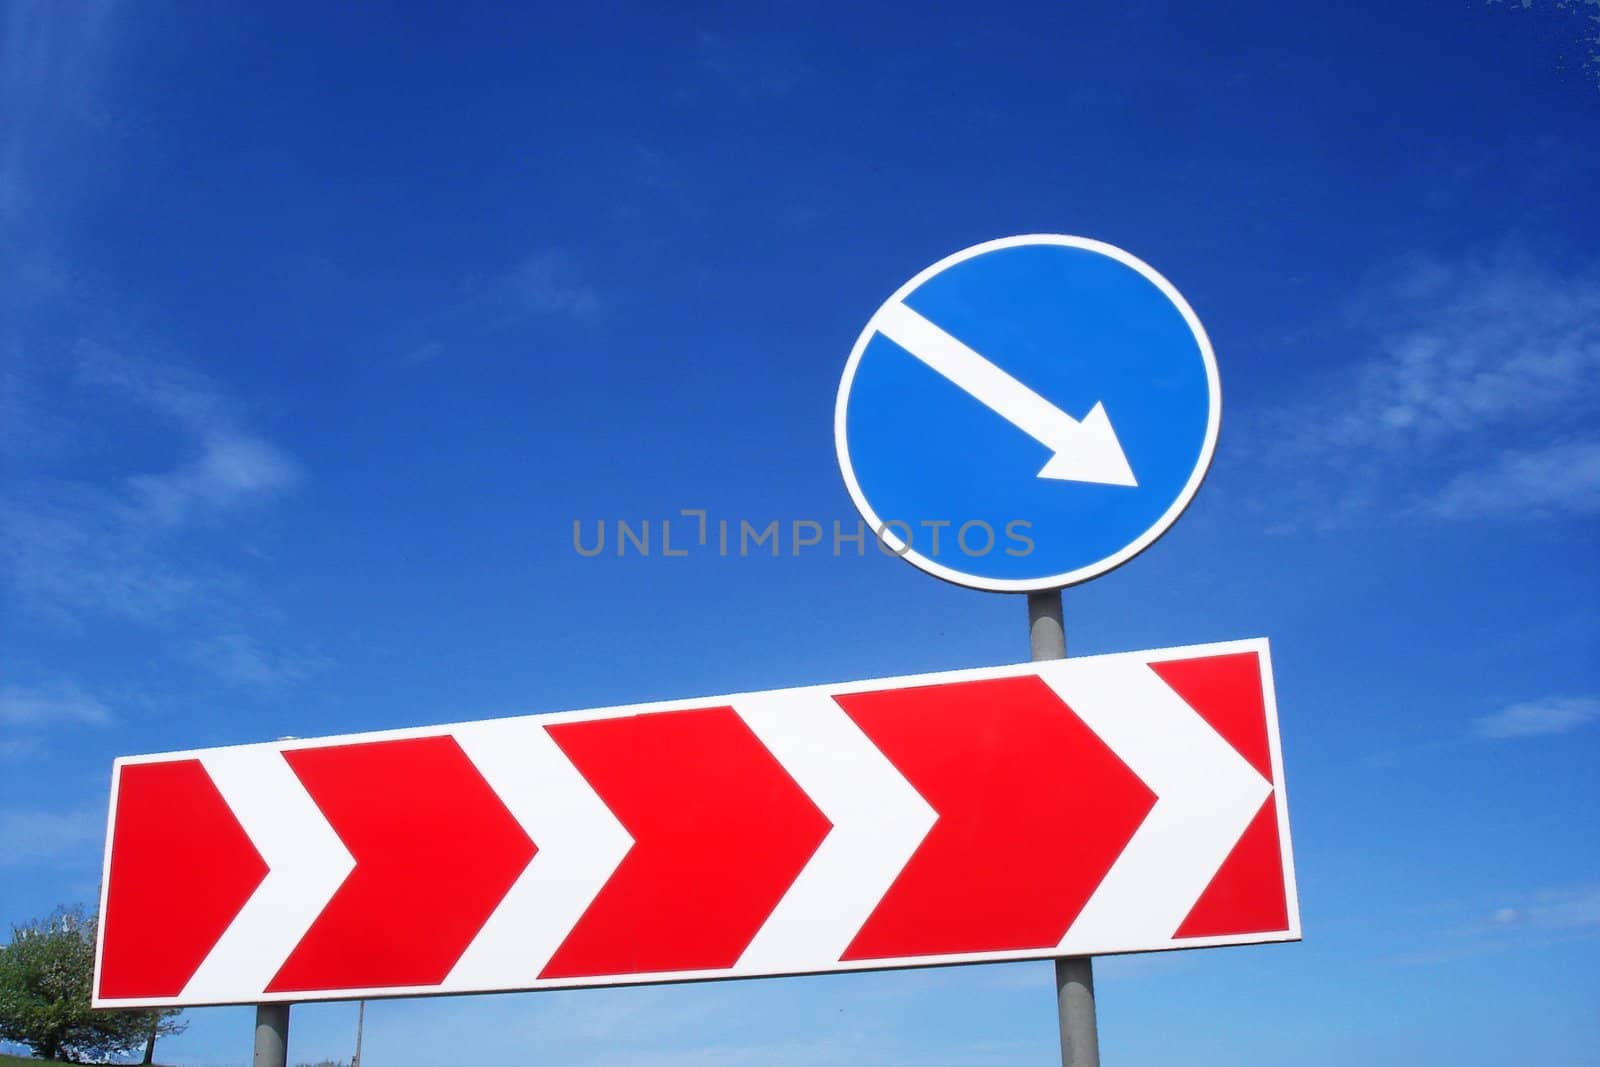 Road sign on a blue sky background